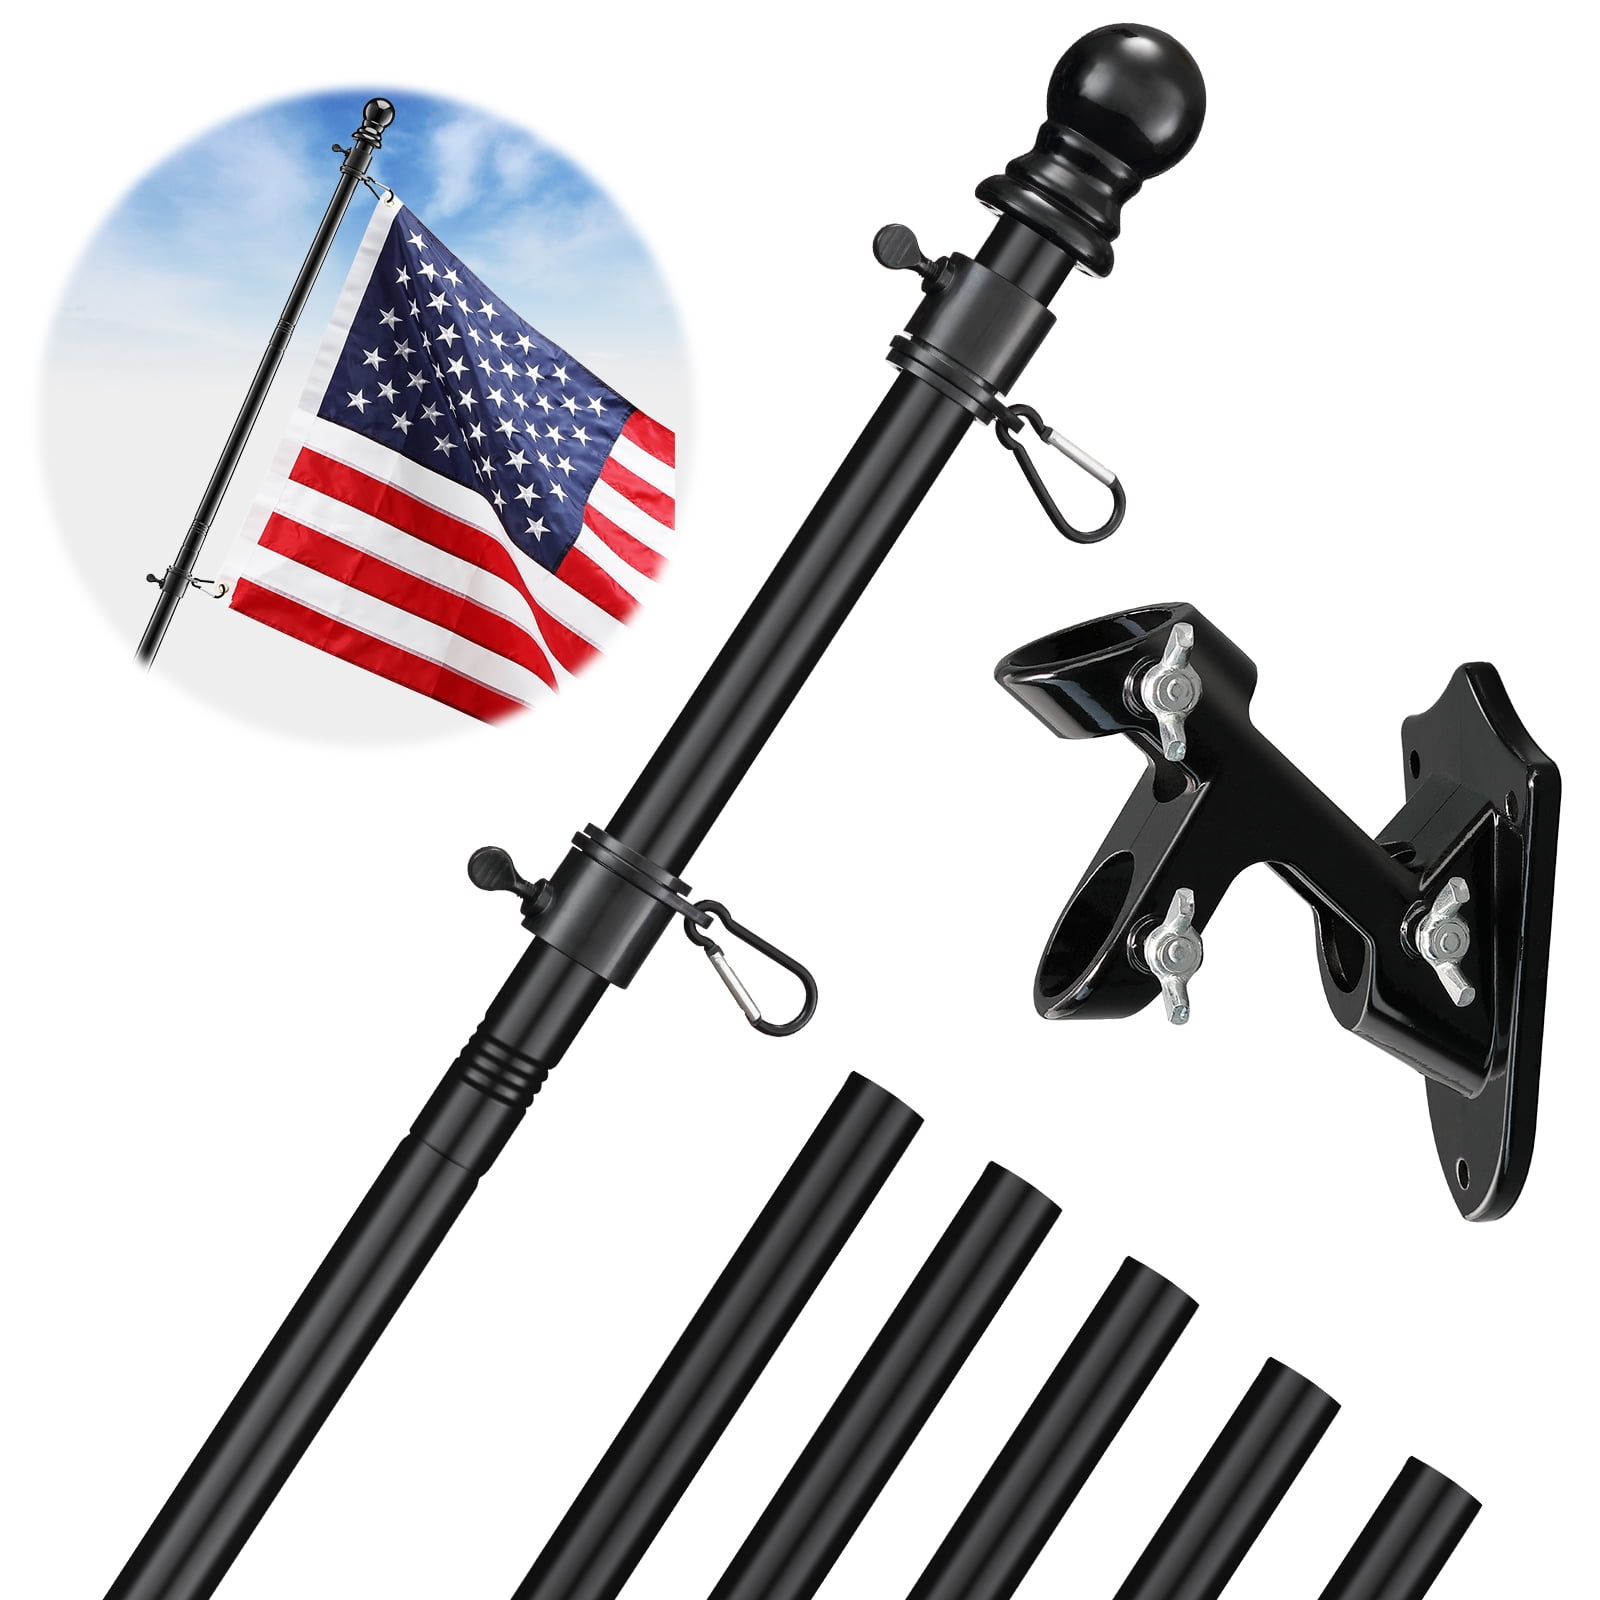 Rustproof for Outdoor Garden Roof Walls Yard Truck Without Bracket diig 5FT Flag Pole Kit,Stainless Steel Heavy Duty Black American US Flagpole 